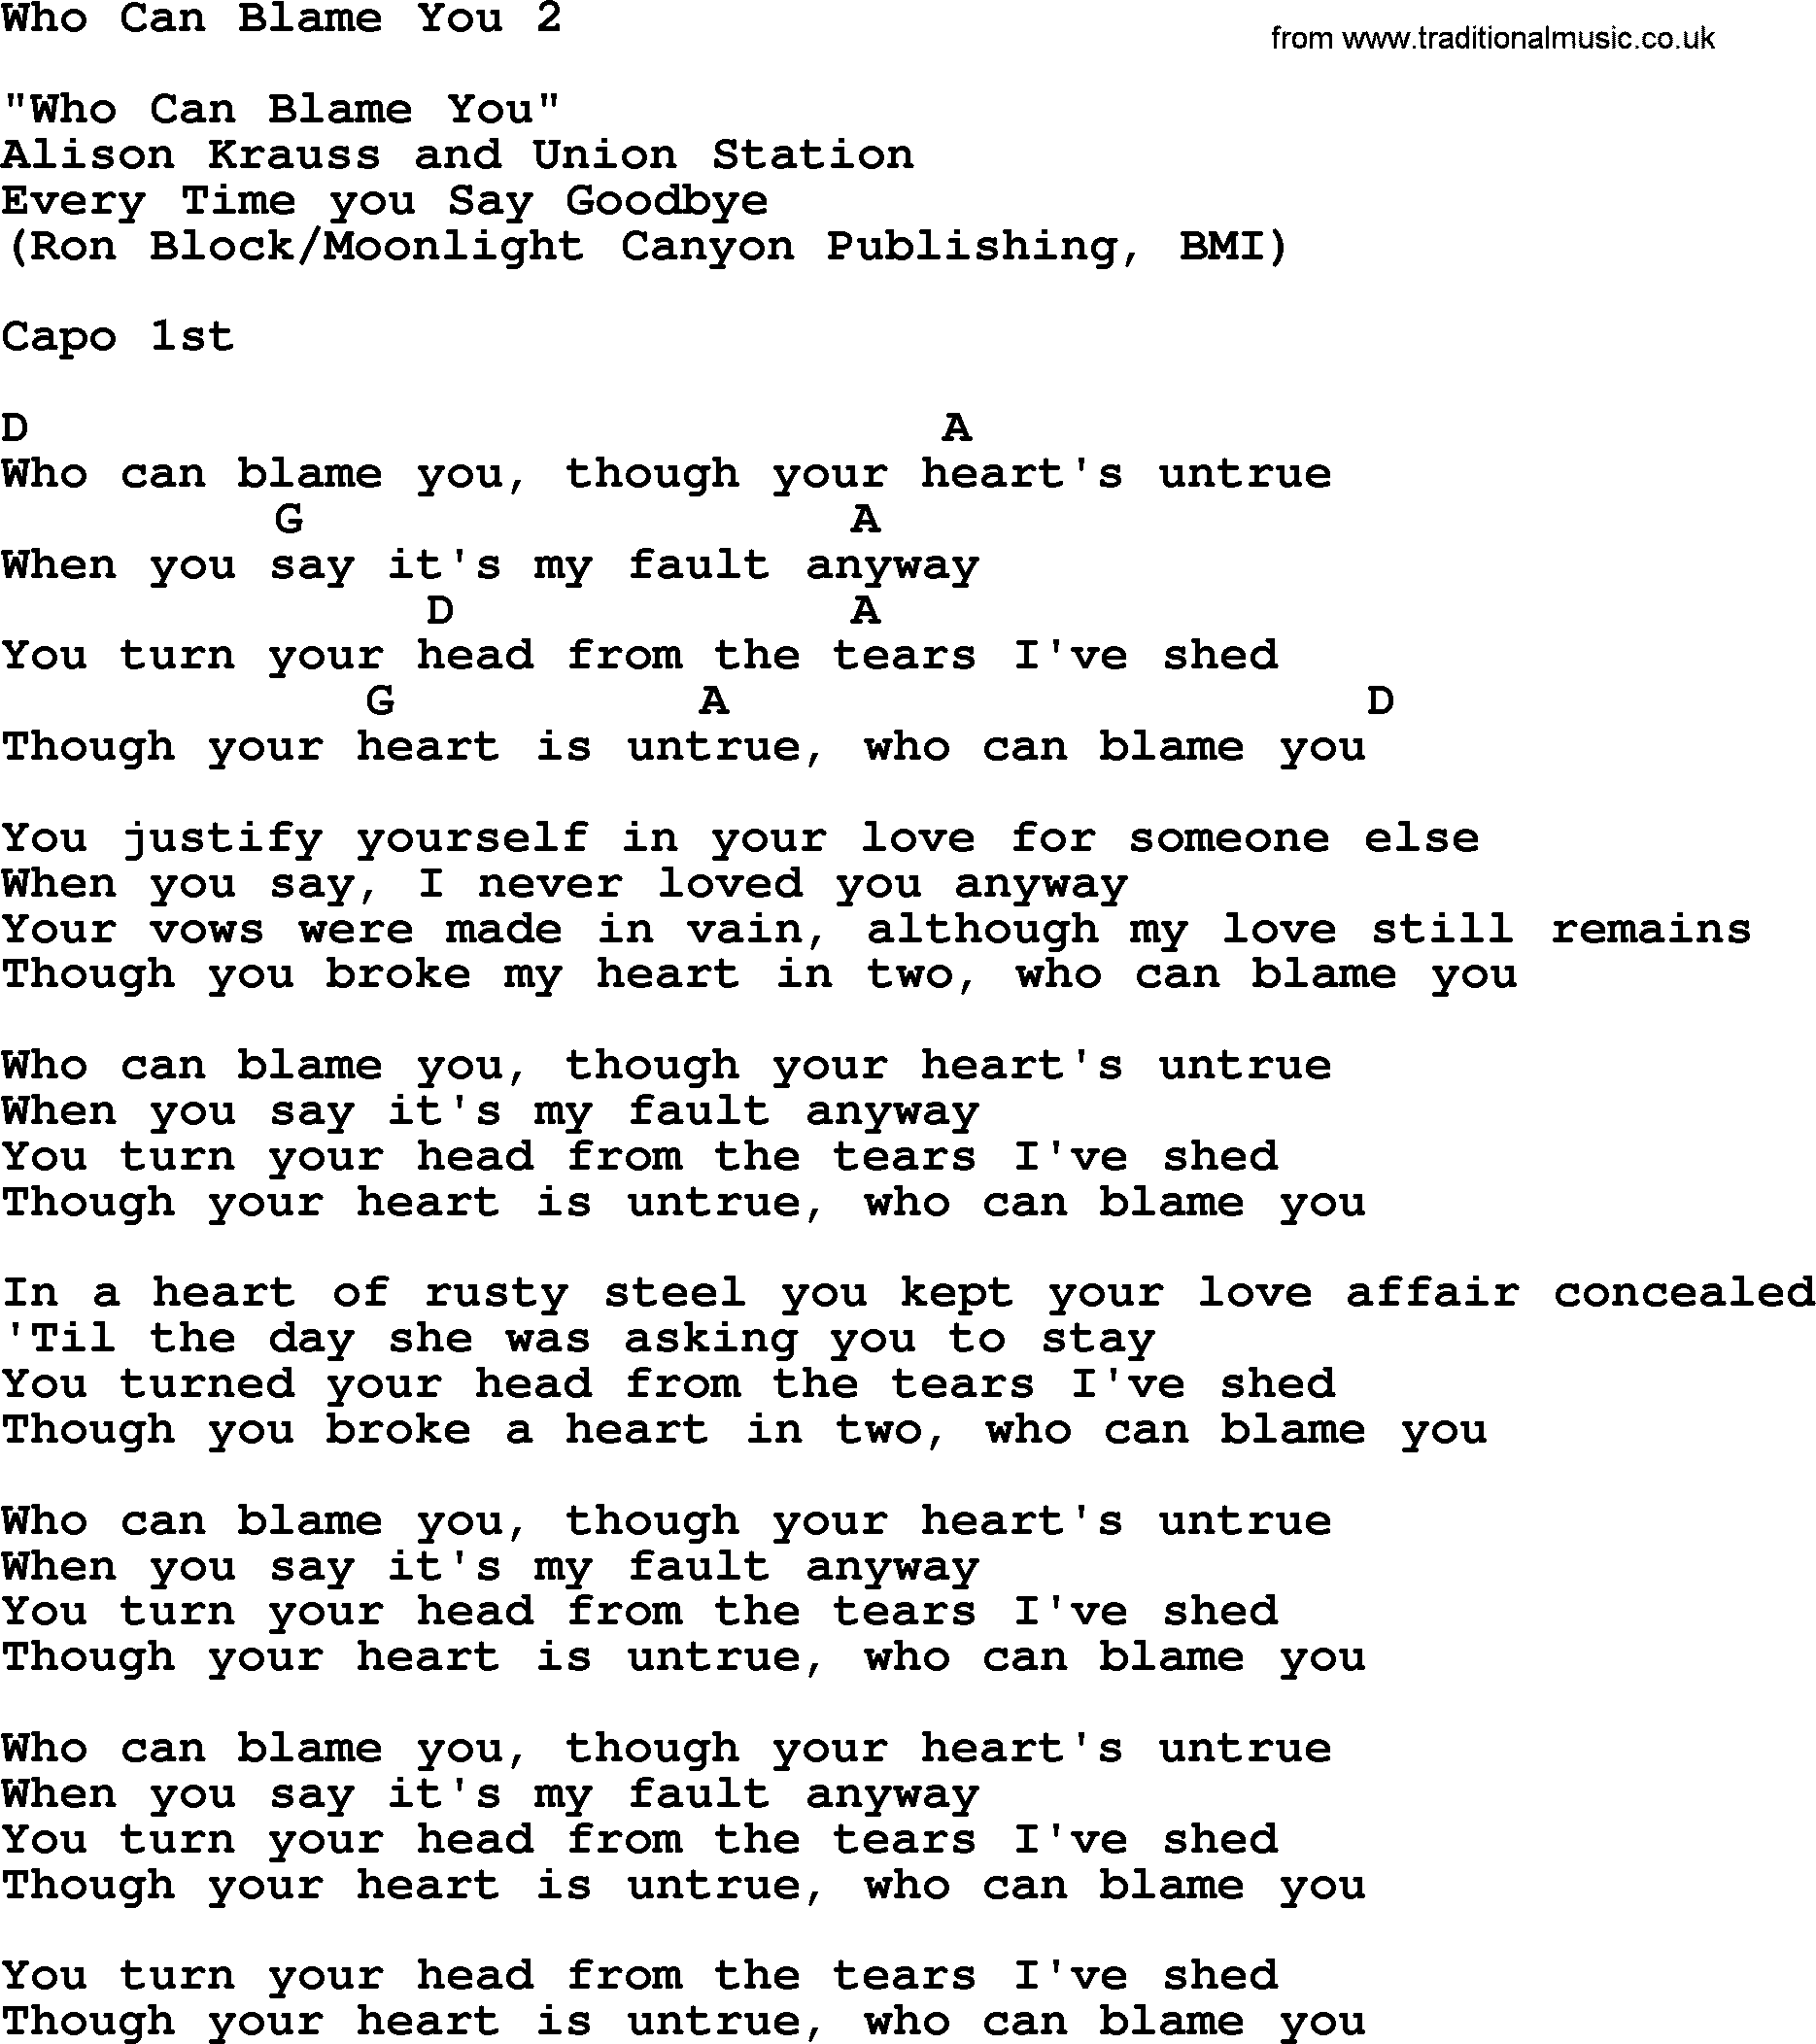 Bluegrass song: Who Can Blame You 2, lyrics and chords